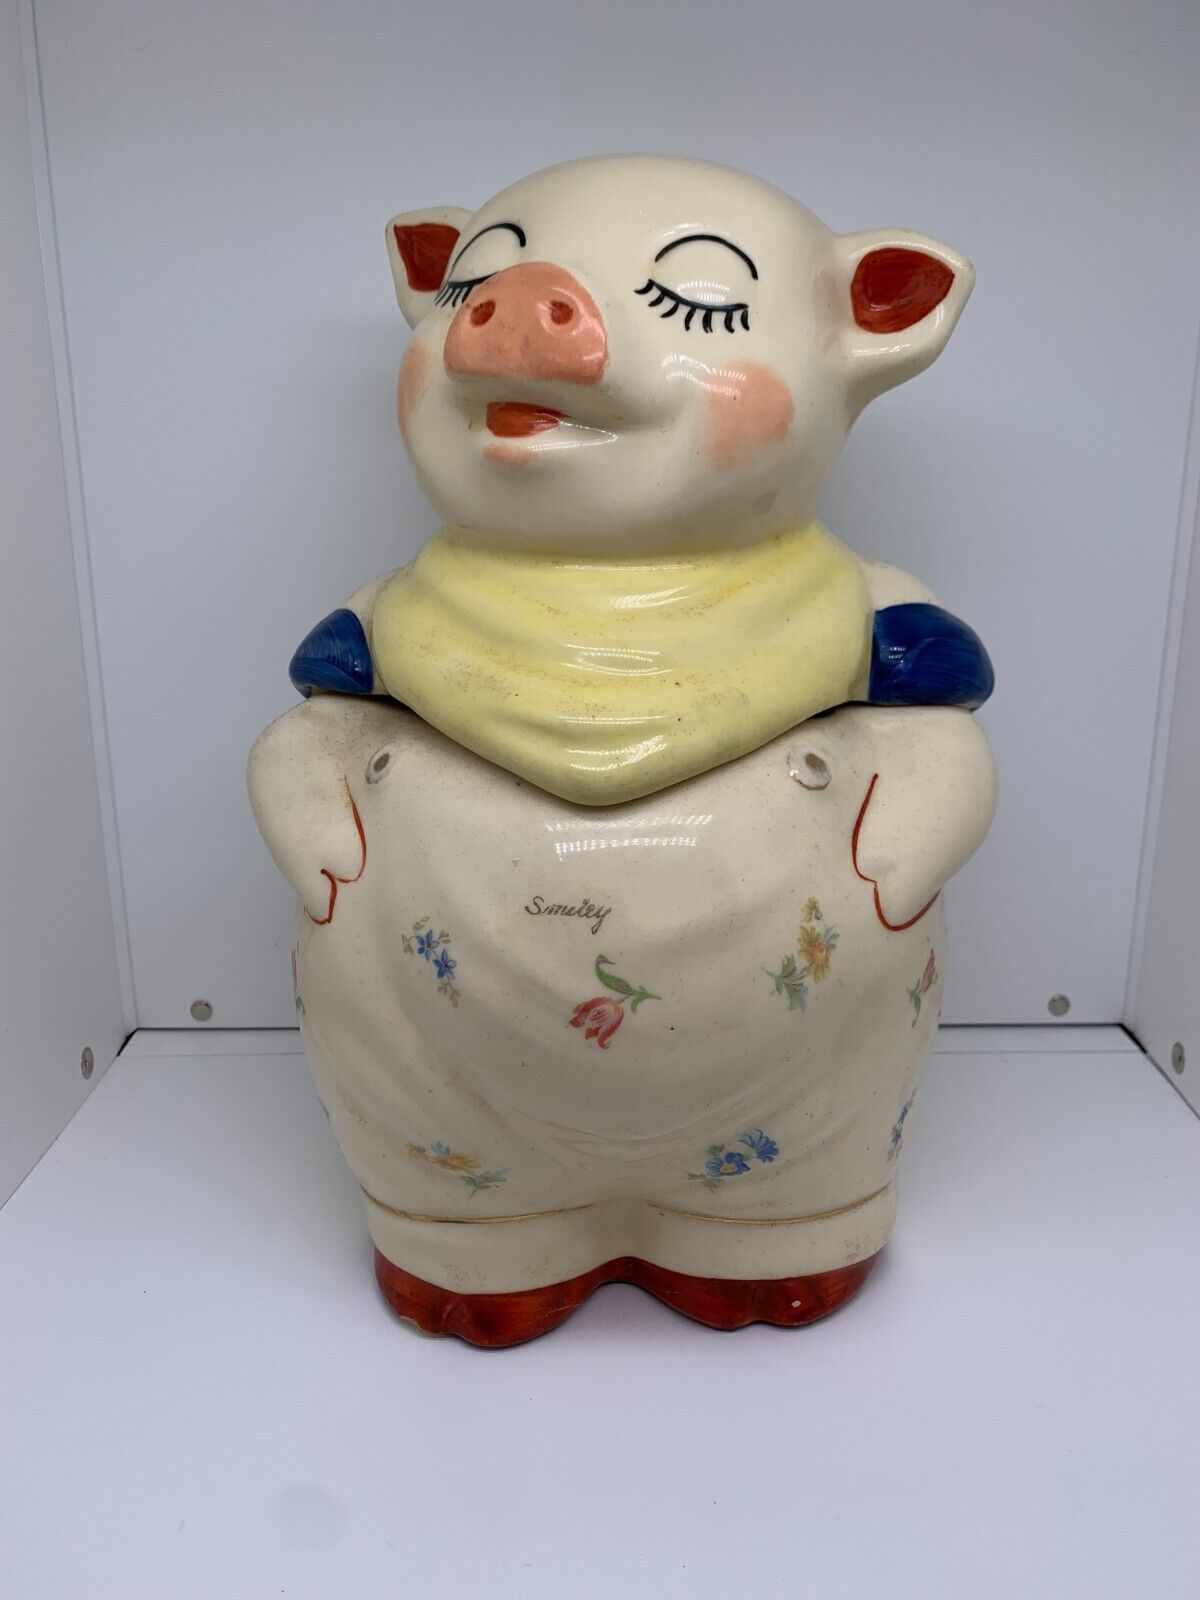 SMILEY PIG COOKIE JAR YELLOW SCARF VINTAGE ANTIQUE 1940s SHAWNEE POTTERY 11.5